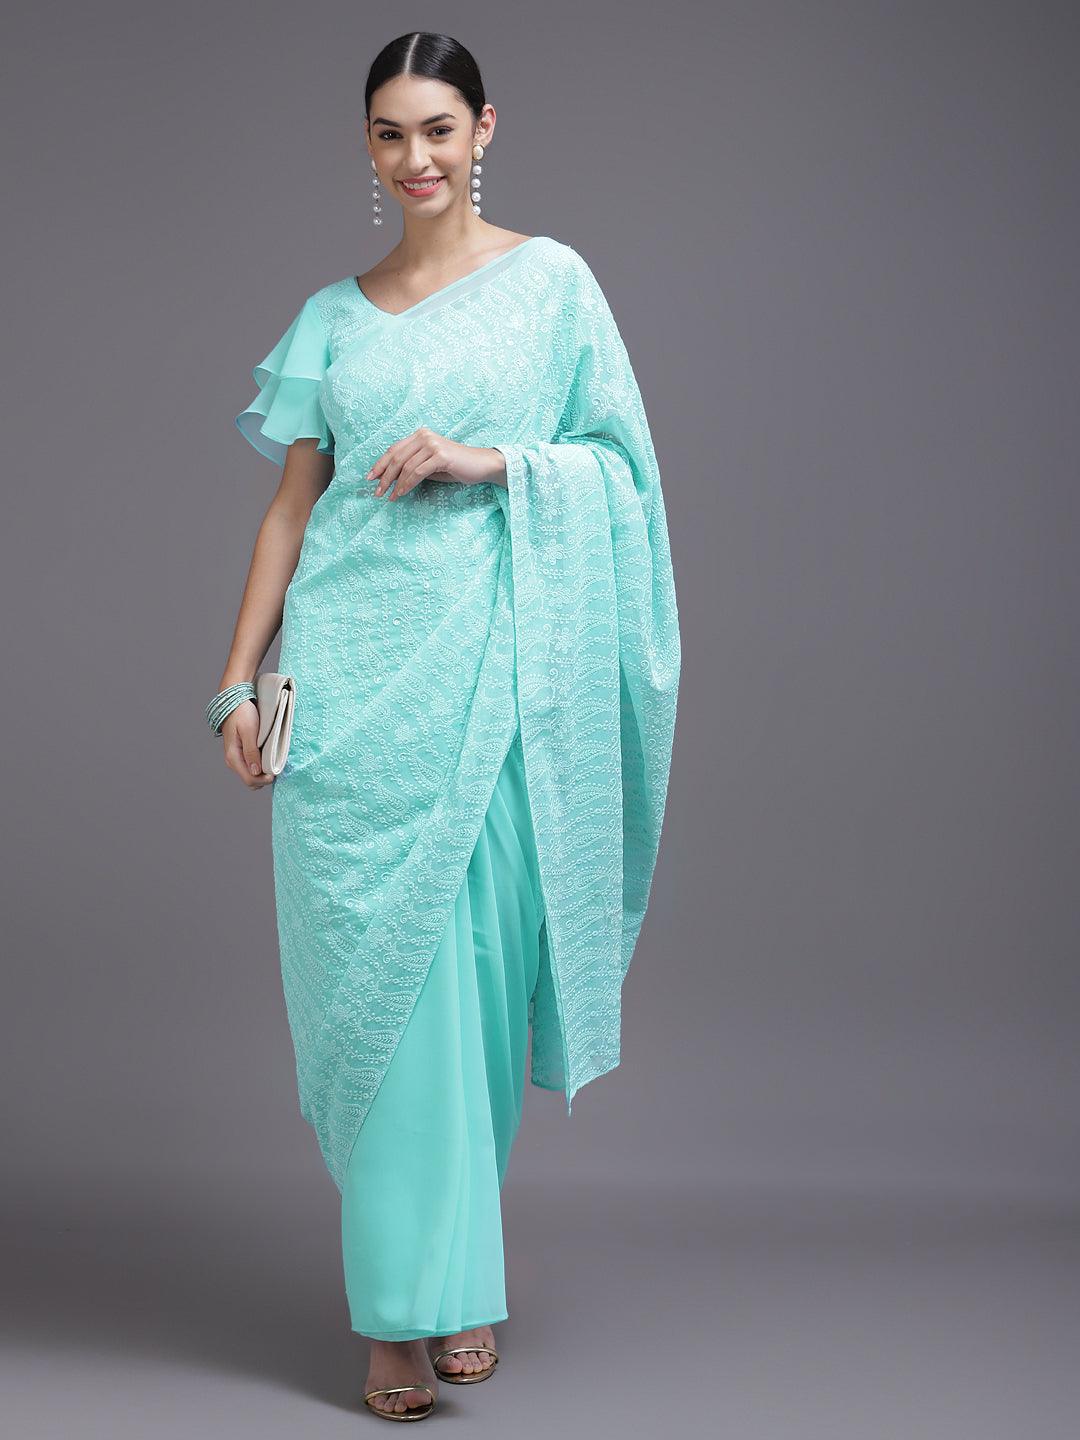 Turquoise Blue Embroidered Georgette Saree